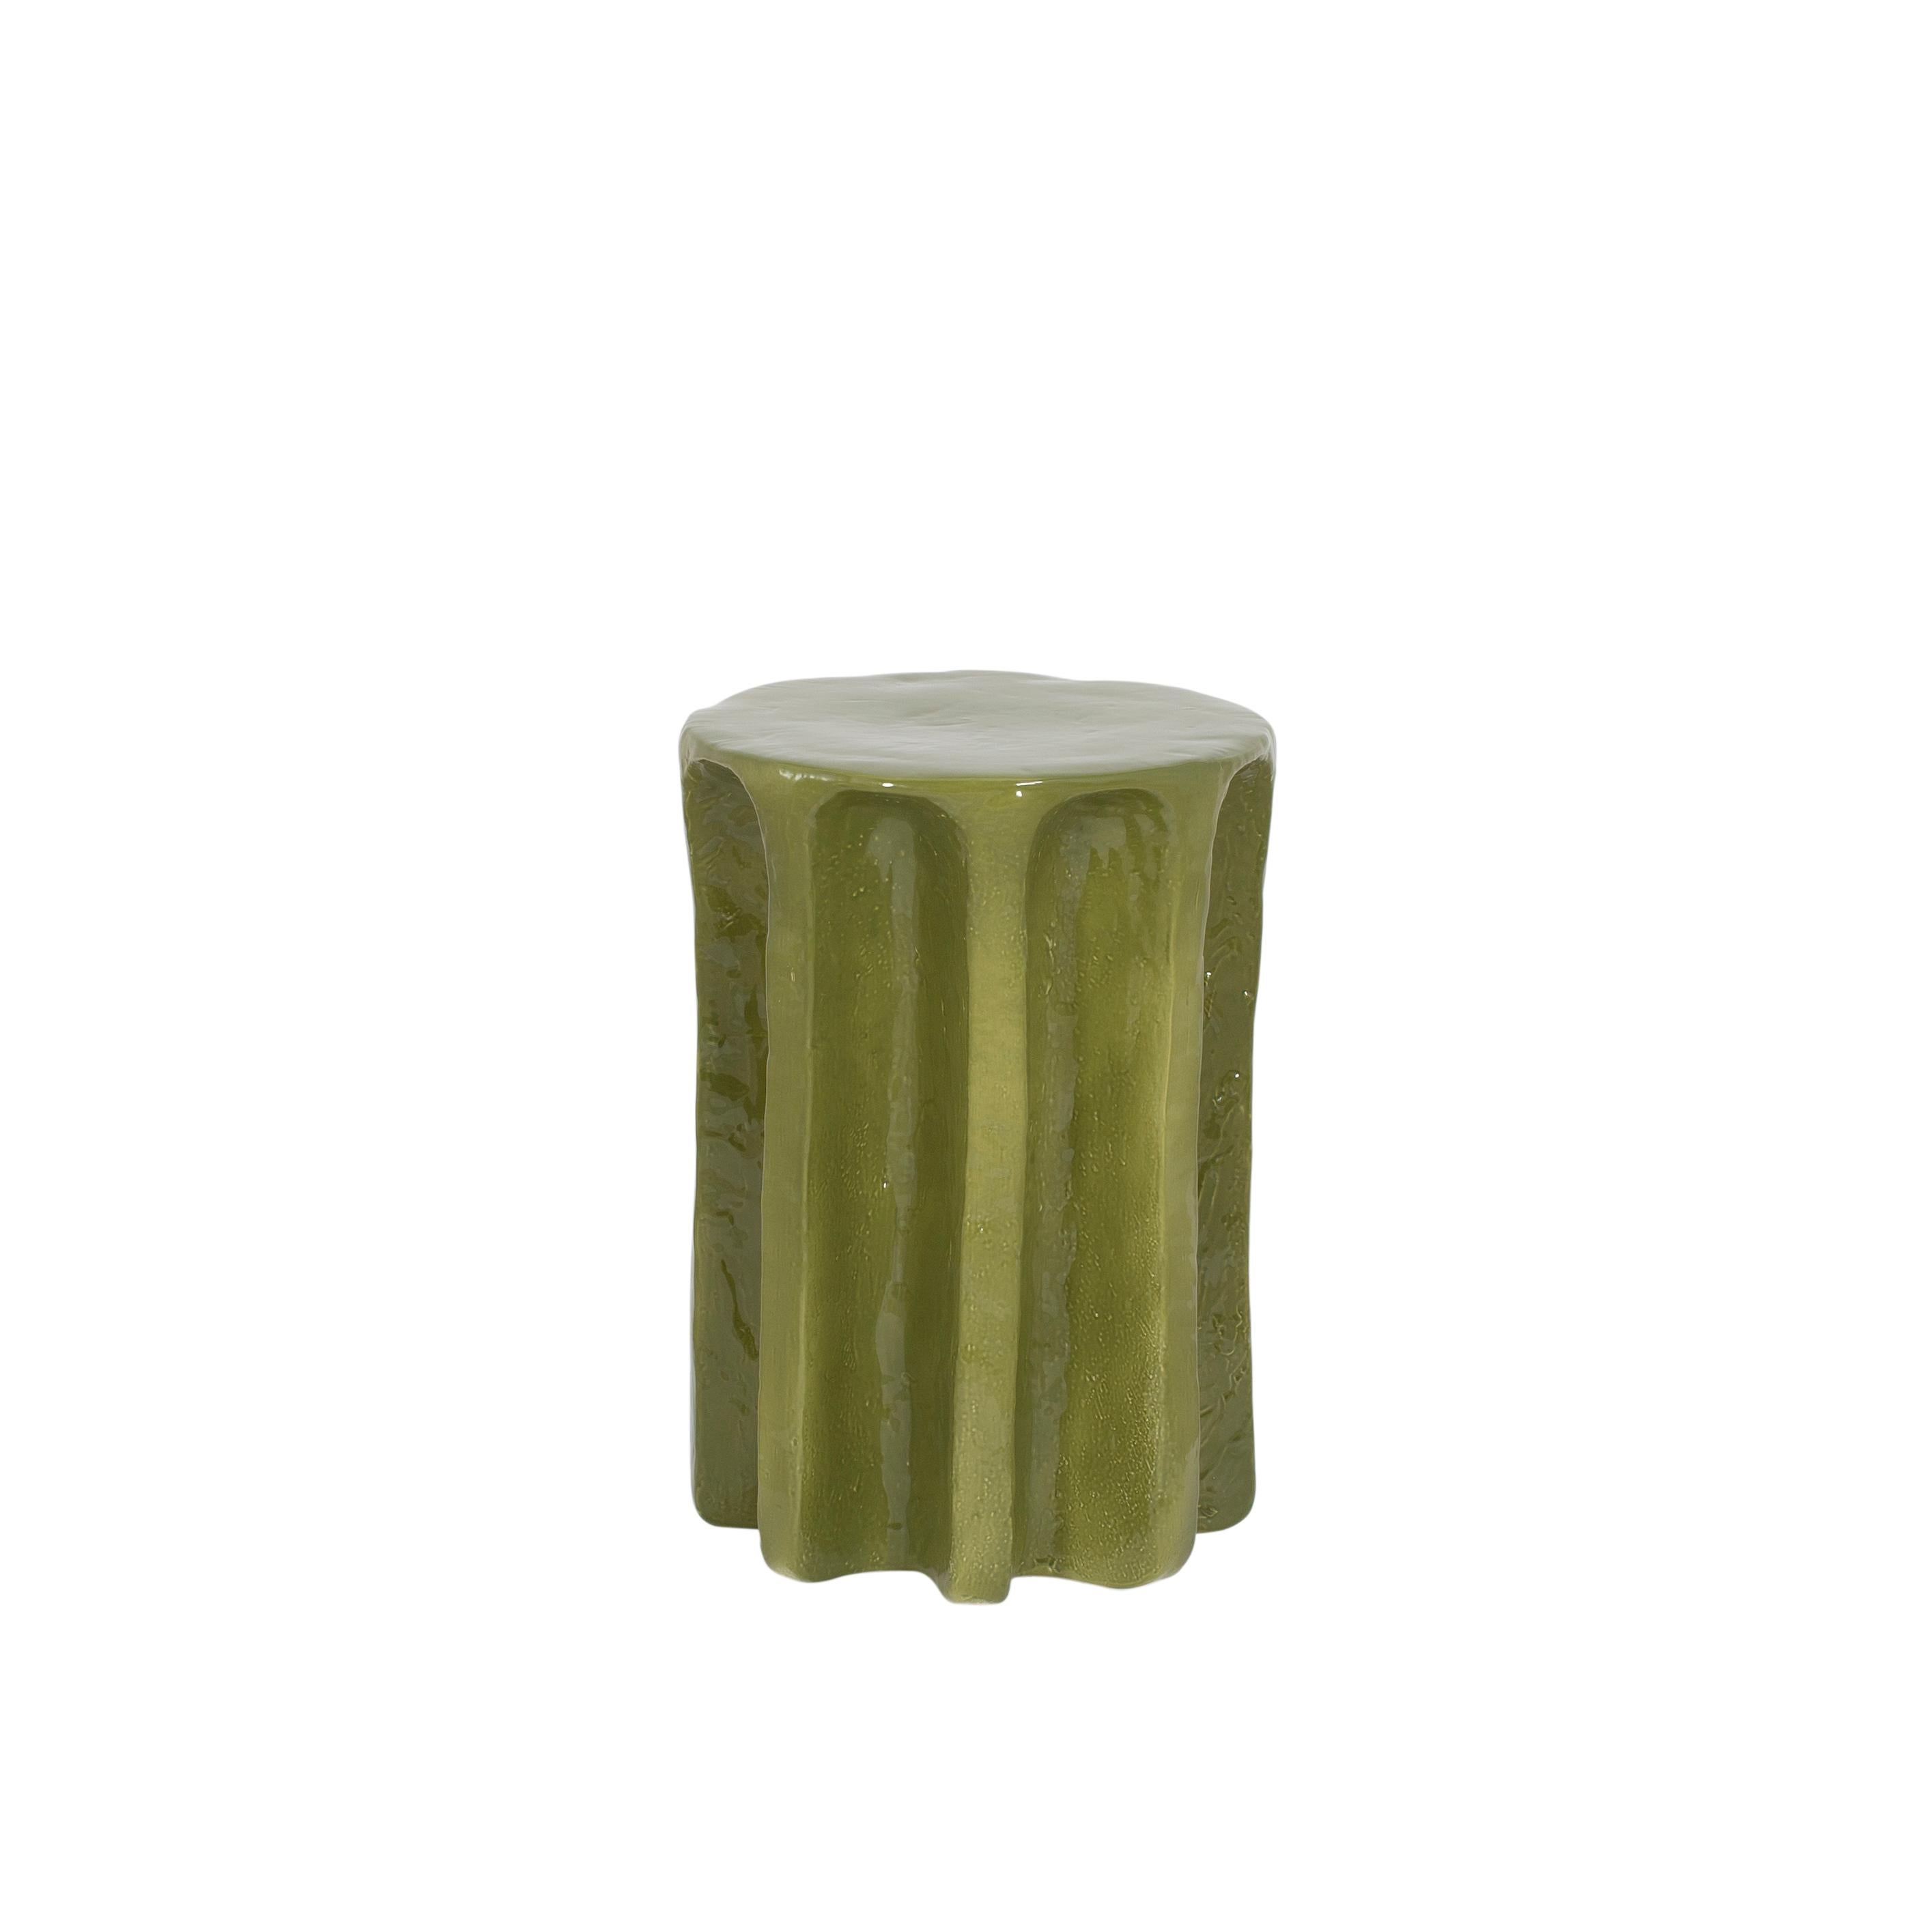 Chouchou high green side table by Pulpo
Dimensions: D39 x H57 cm
Materials: ceramic

Also available in different Colours. 

Chouchou bears the contours of an antique column – which, knowing designer Lorenzo Zanovello’s, is most likely a reference to